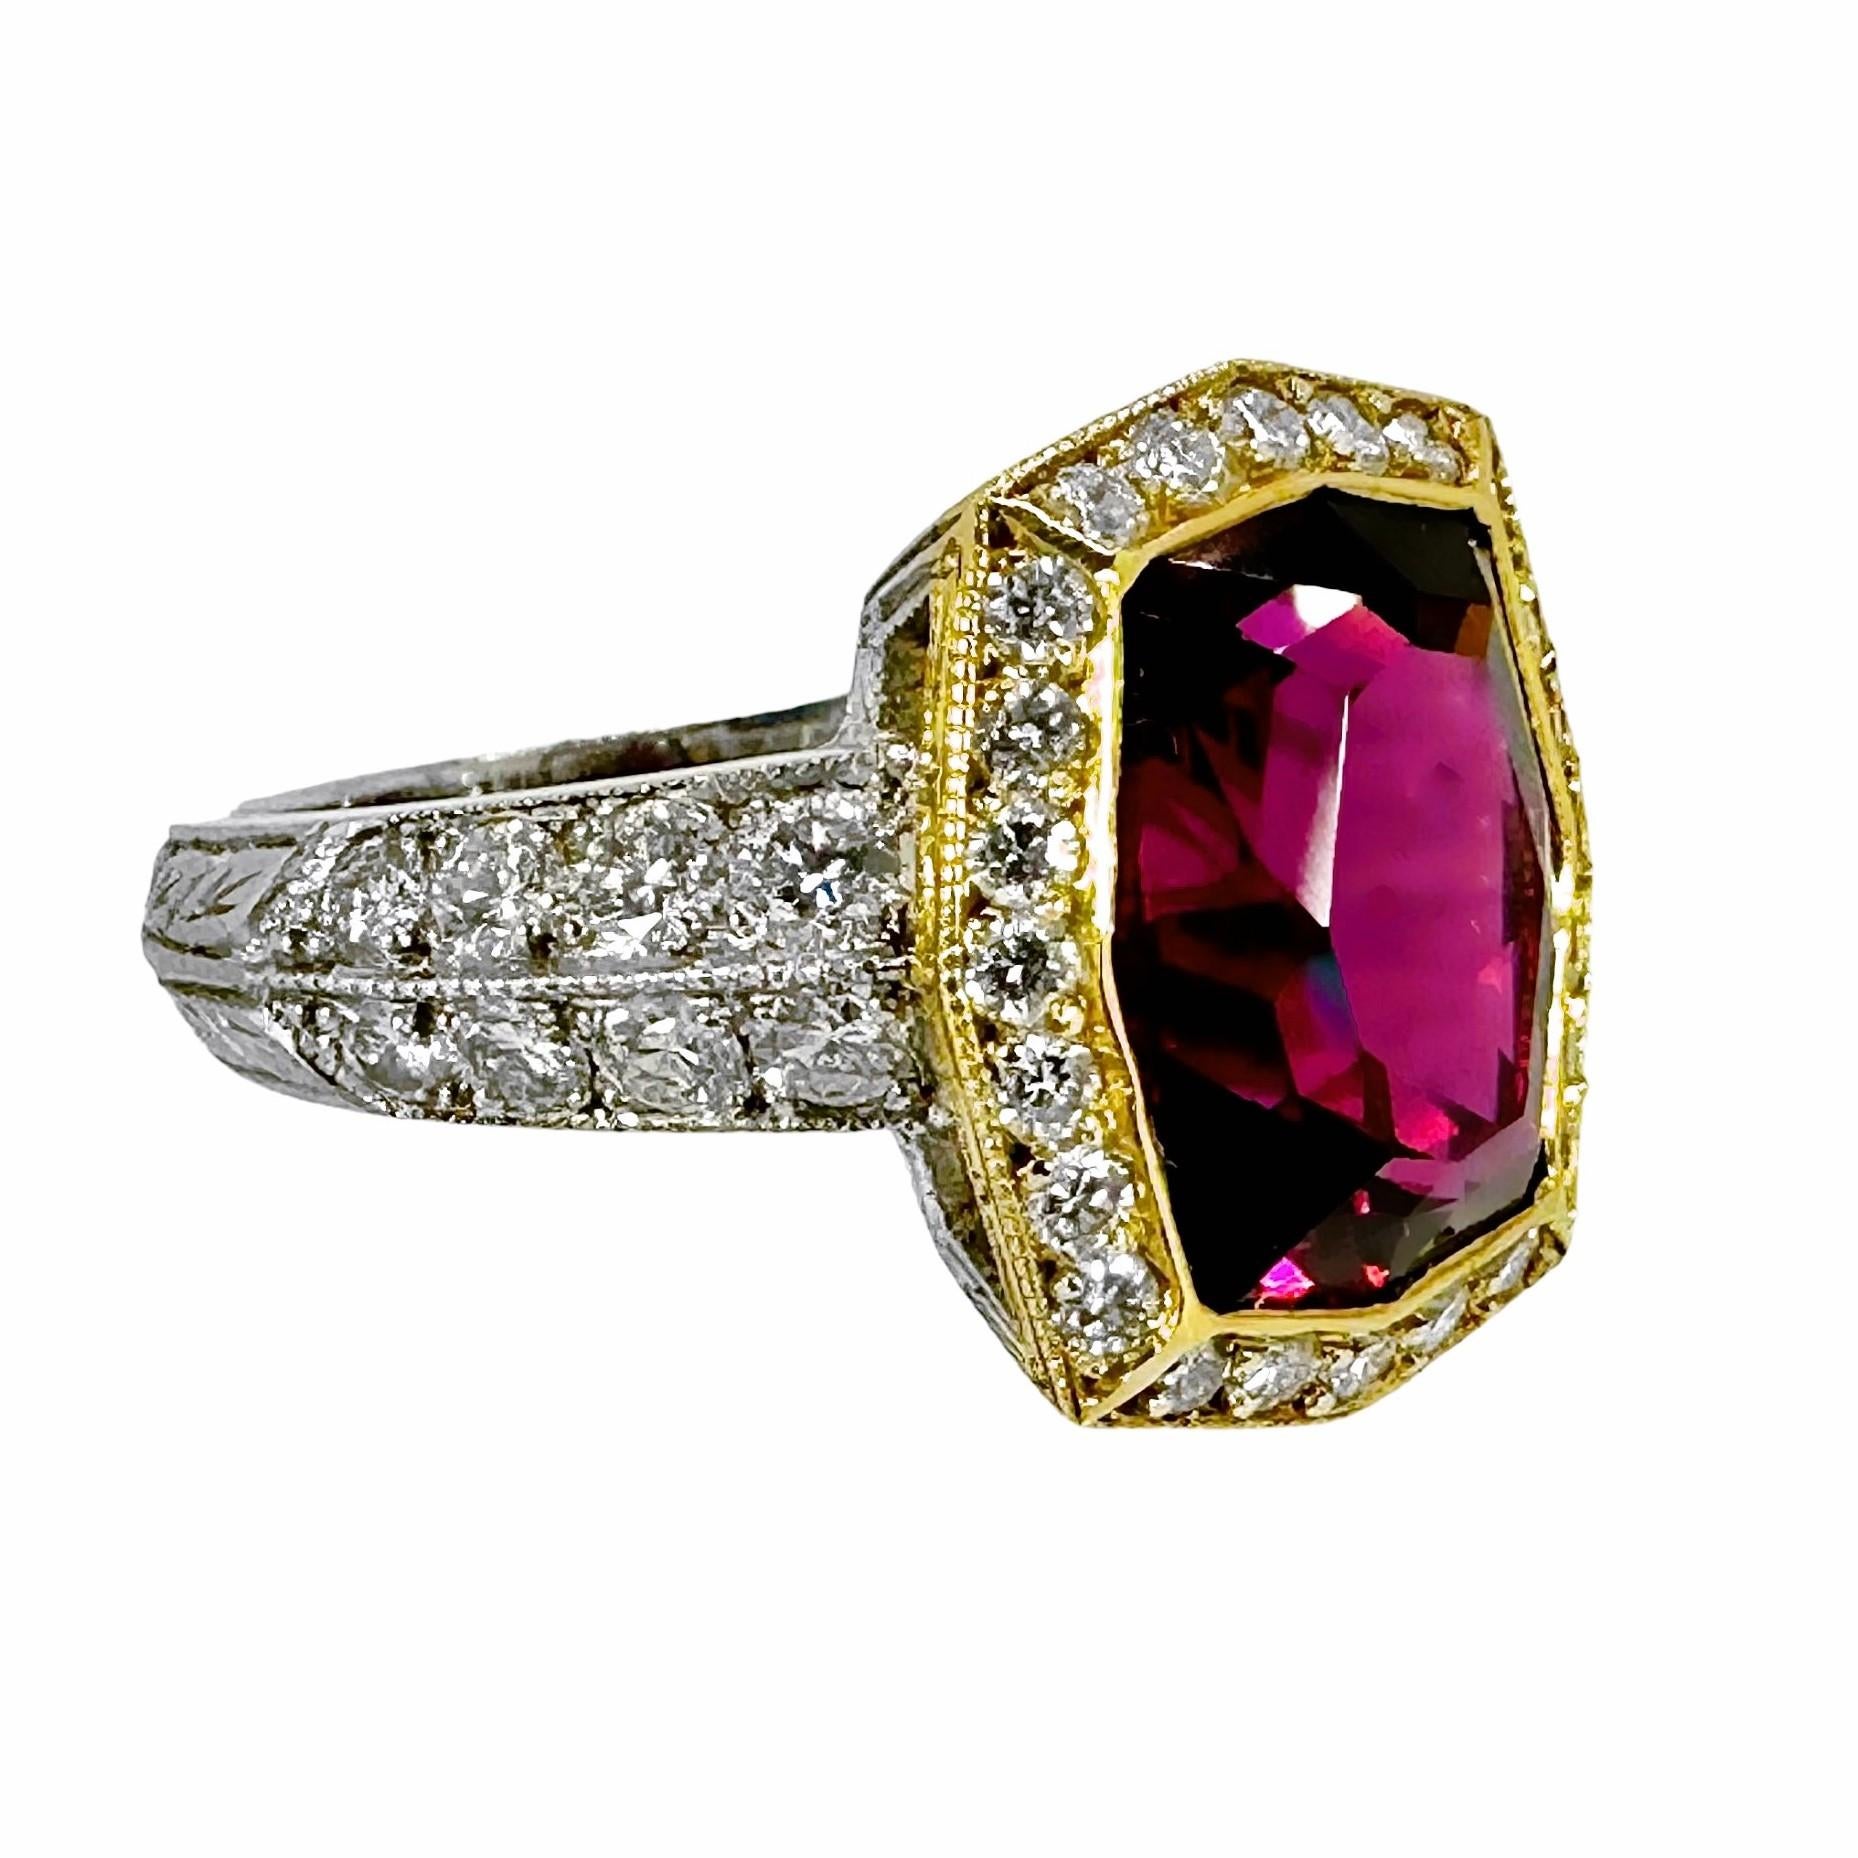 This unique ring with a vibrant rhodolite Garnet center, the color of fine red wine, is a very skilled melding of 18k yellow gold and platinum. The modified cushion cut center garnet dominates this jewel which was, no doubt, crafted by an absolute